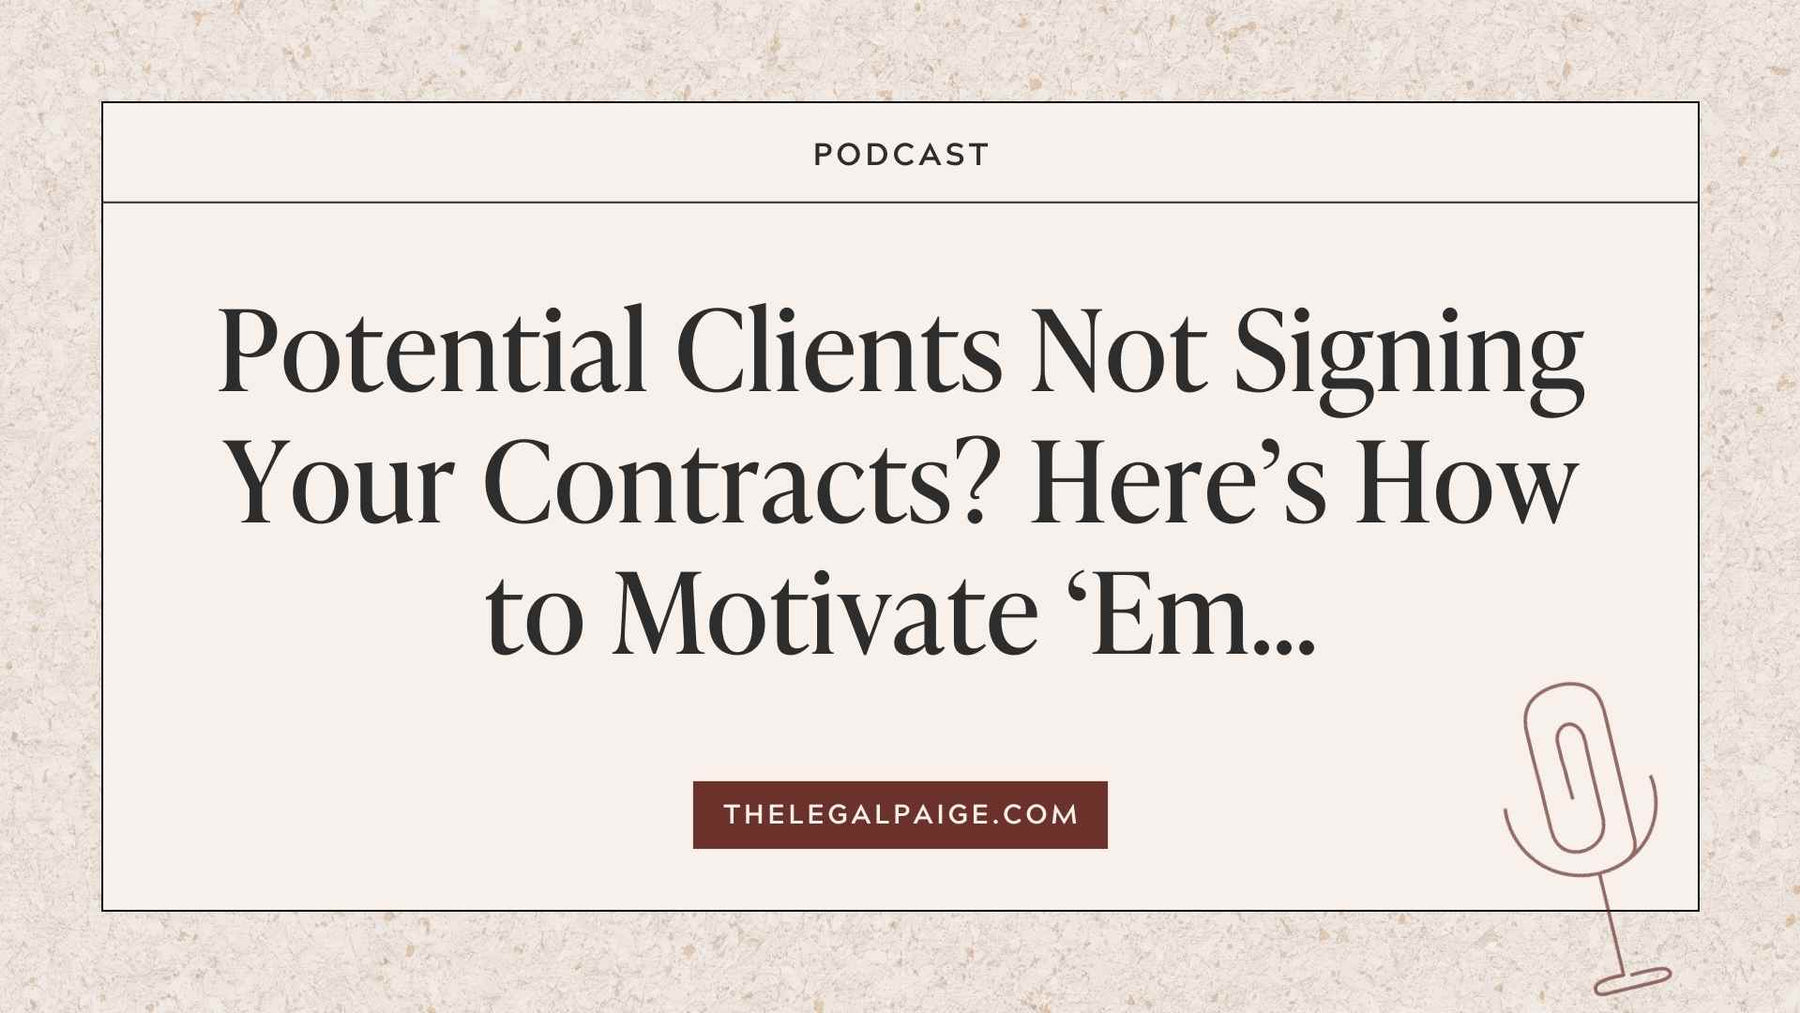 Potential Clients NOT Signing Your Contracts? Here's How to Motivate 'Em...